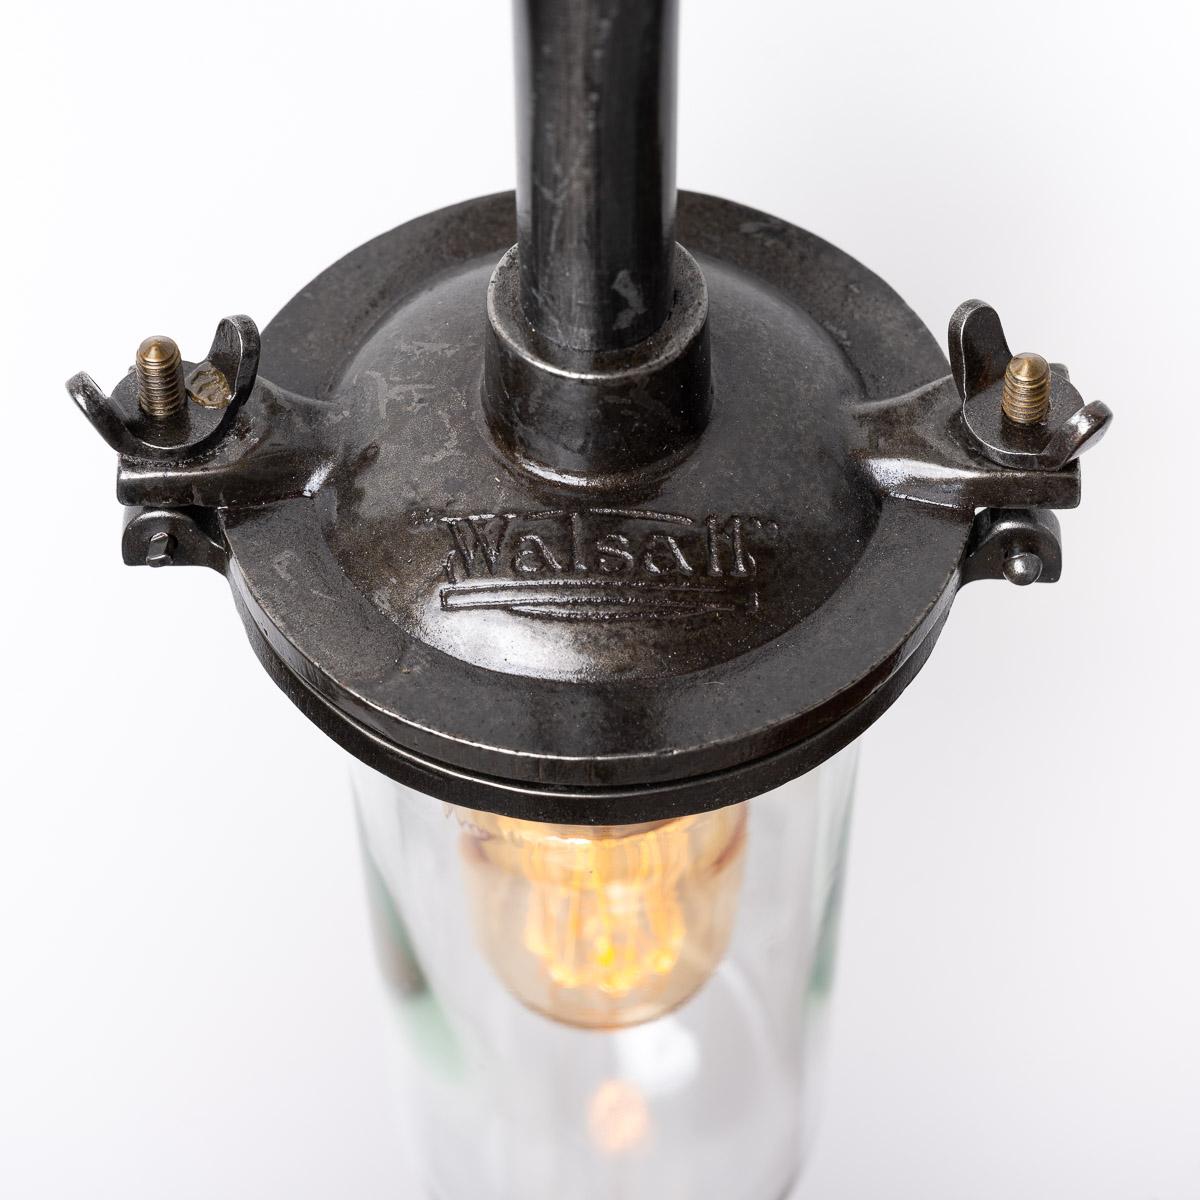 British Reclaimed Vintage Well Glass Wall Light Fittings by Walsall Conduits Ltd For Sale